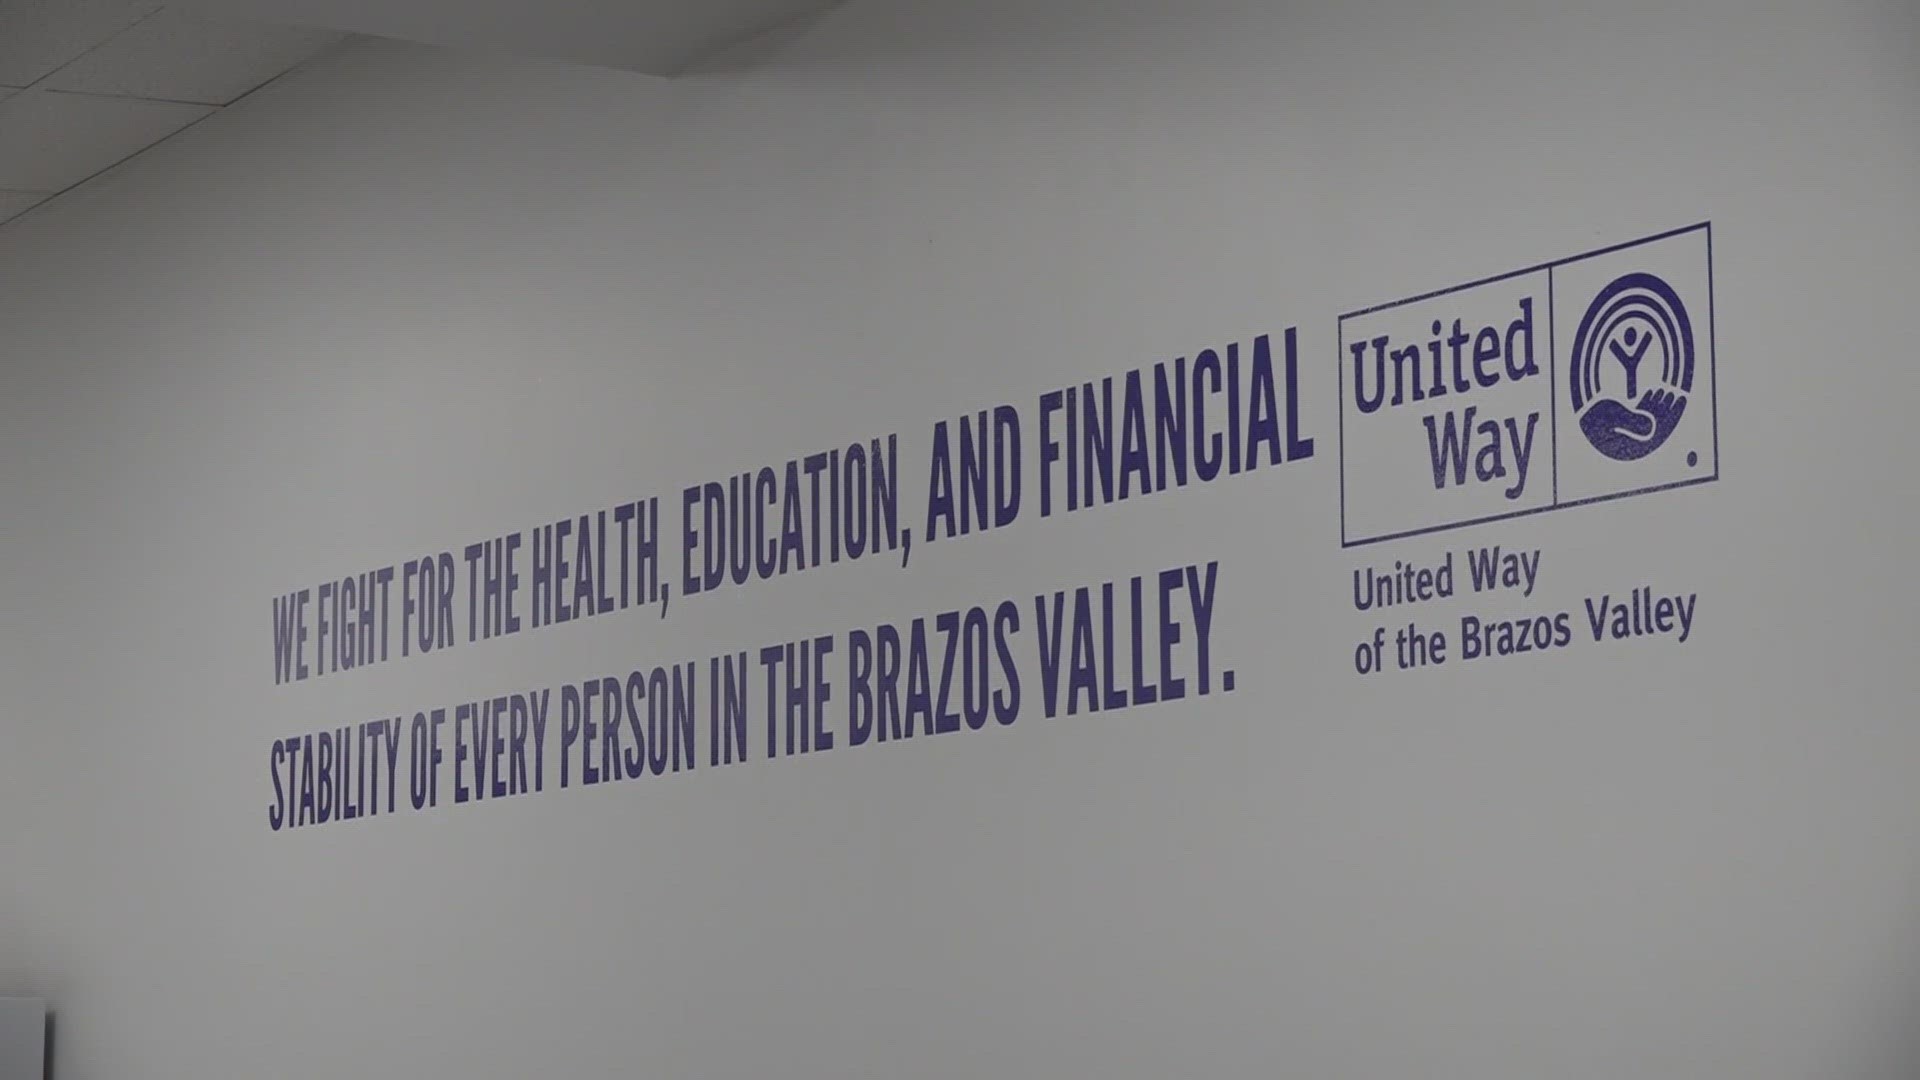 United Way BV has end-of-the-year statistics that give insight on how many residents they are able to help with health care issues throughout the year